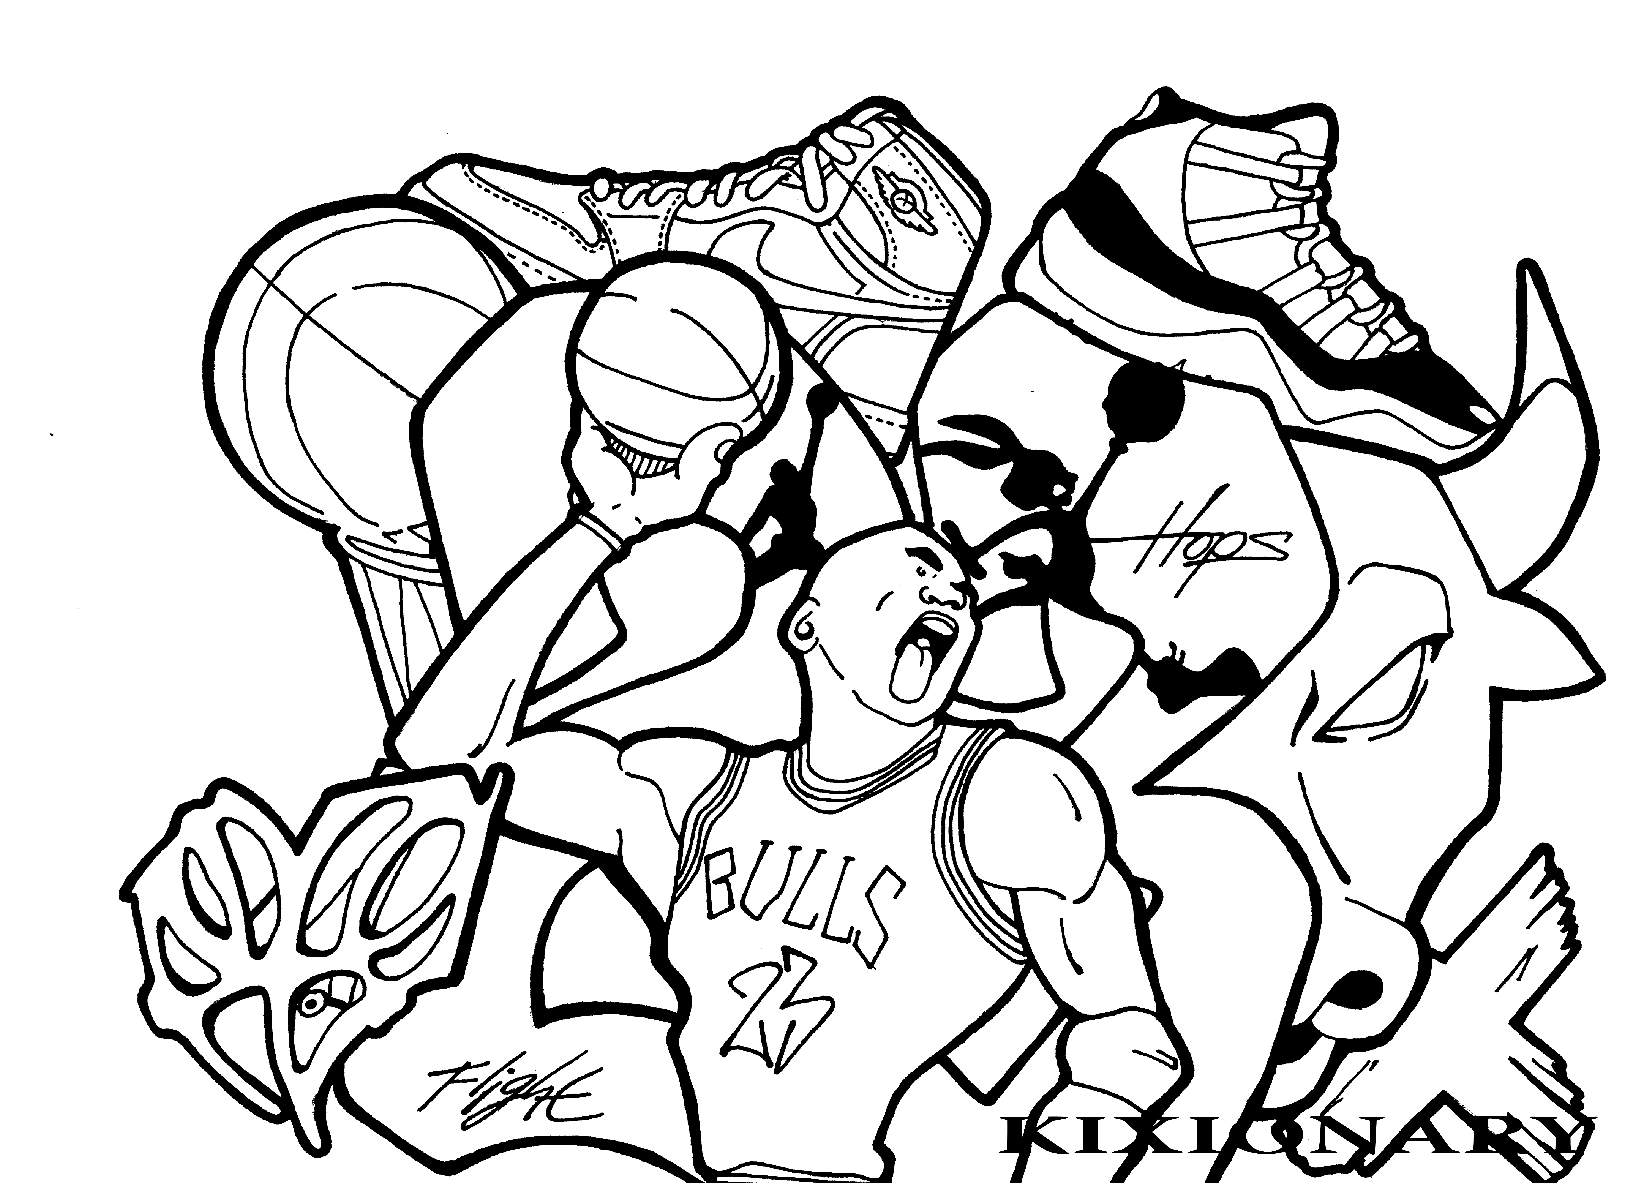 Graffiti and Street Art - Coloring Pages for Adults